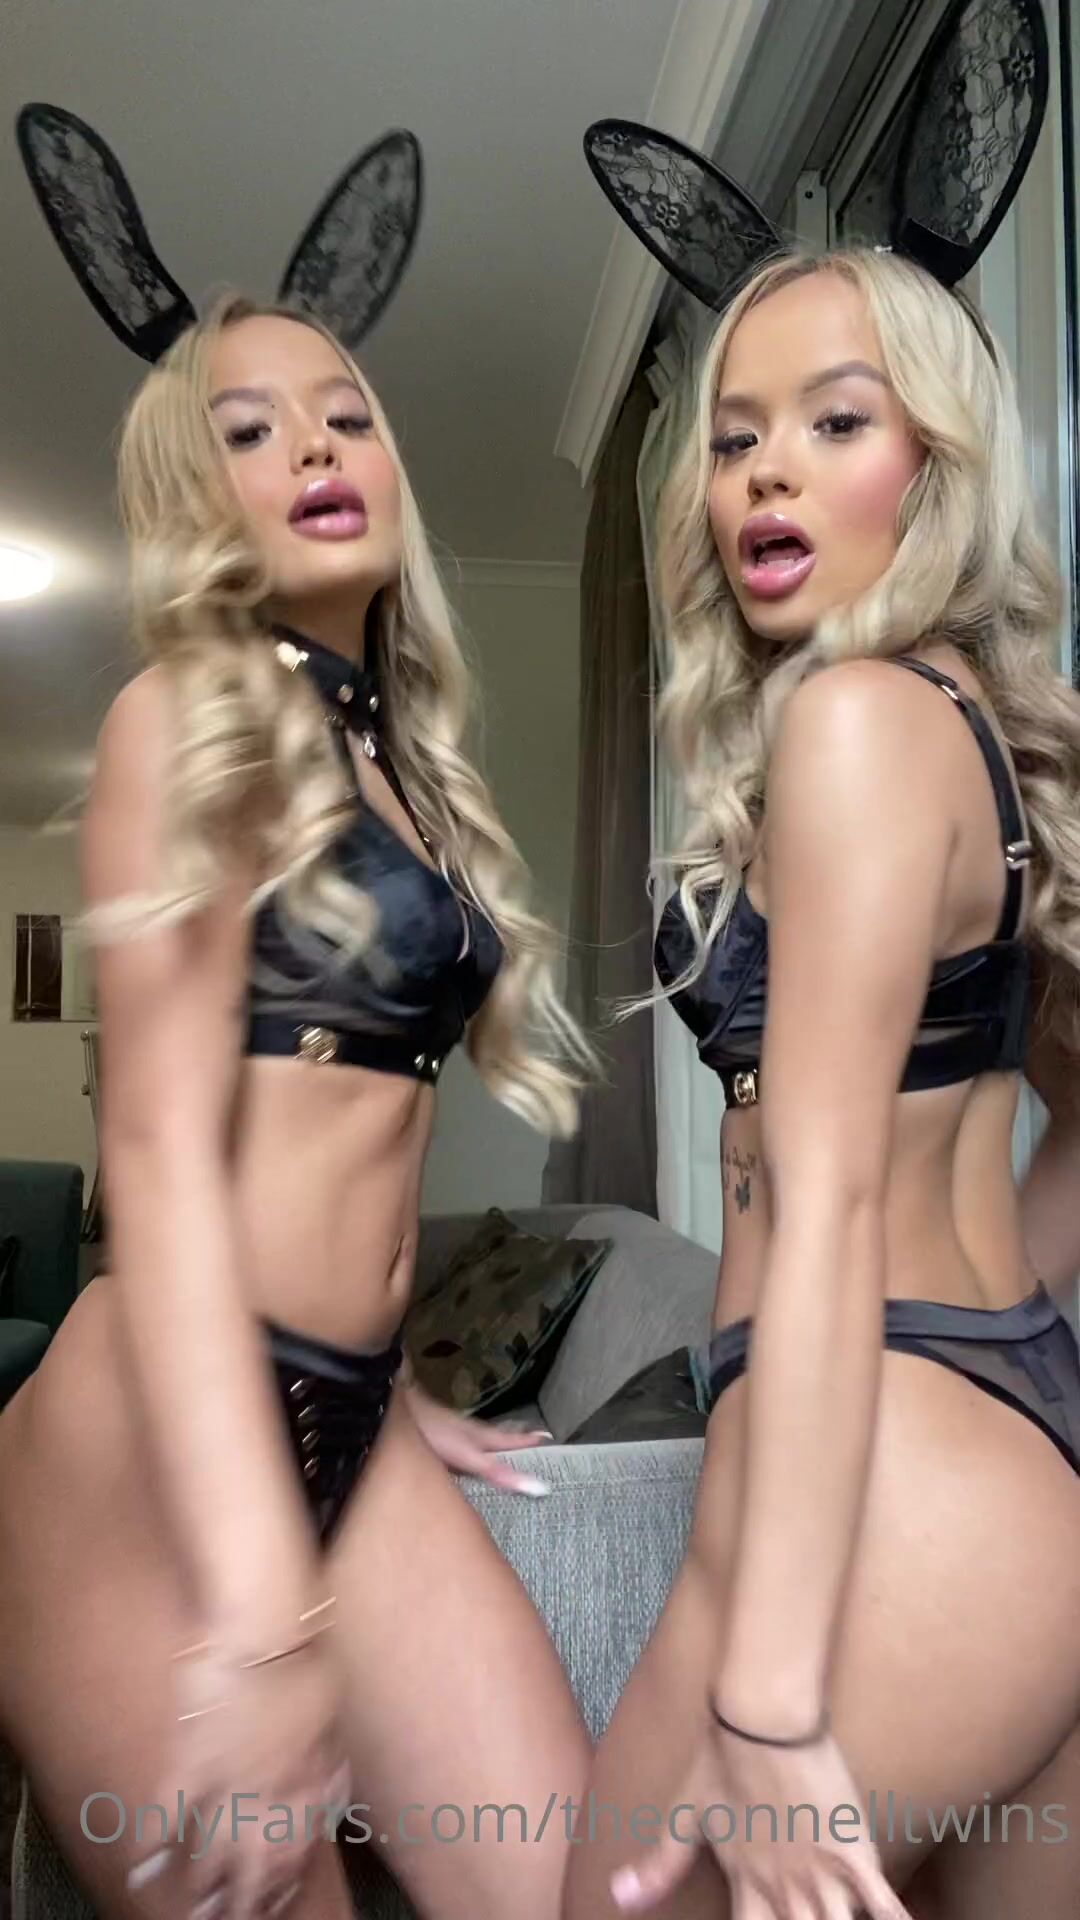 Theconnelltwins 18